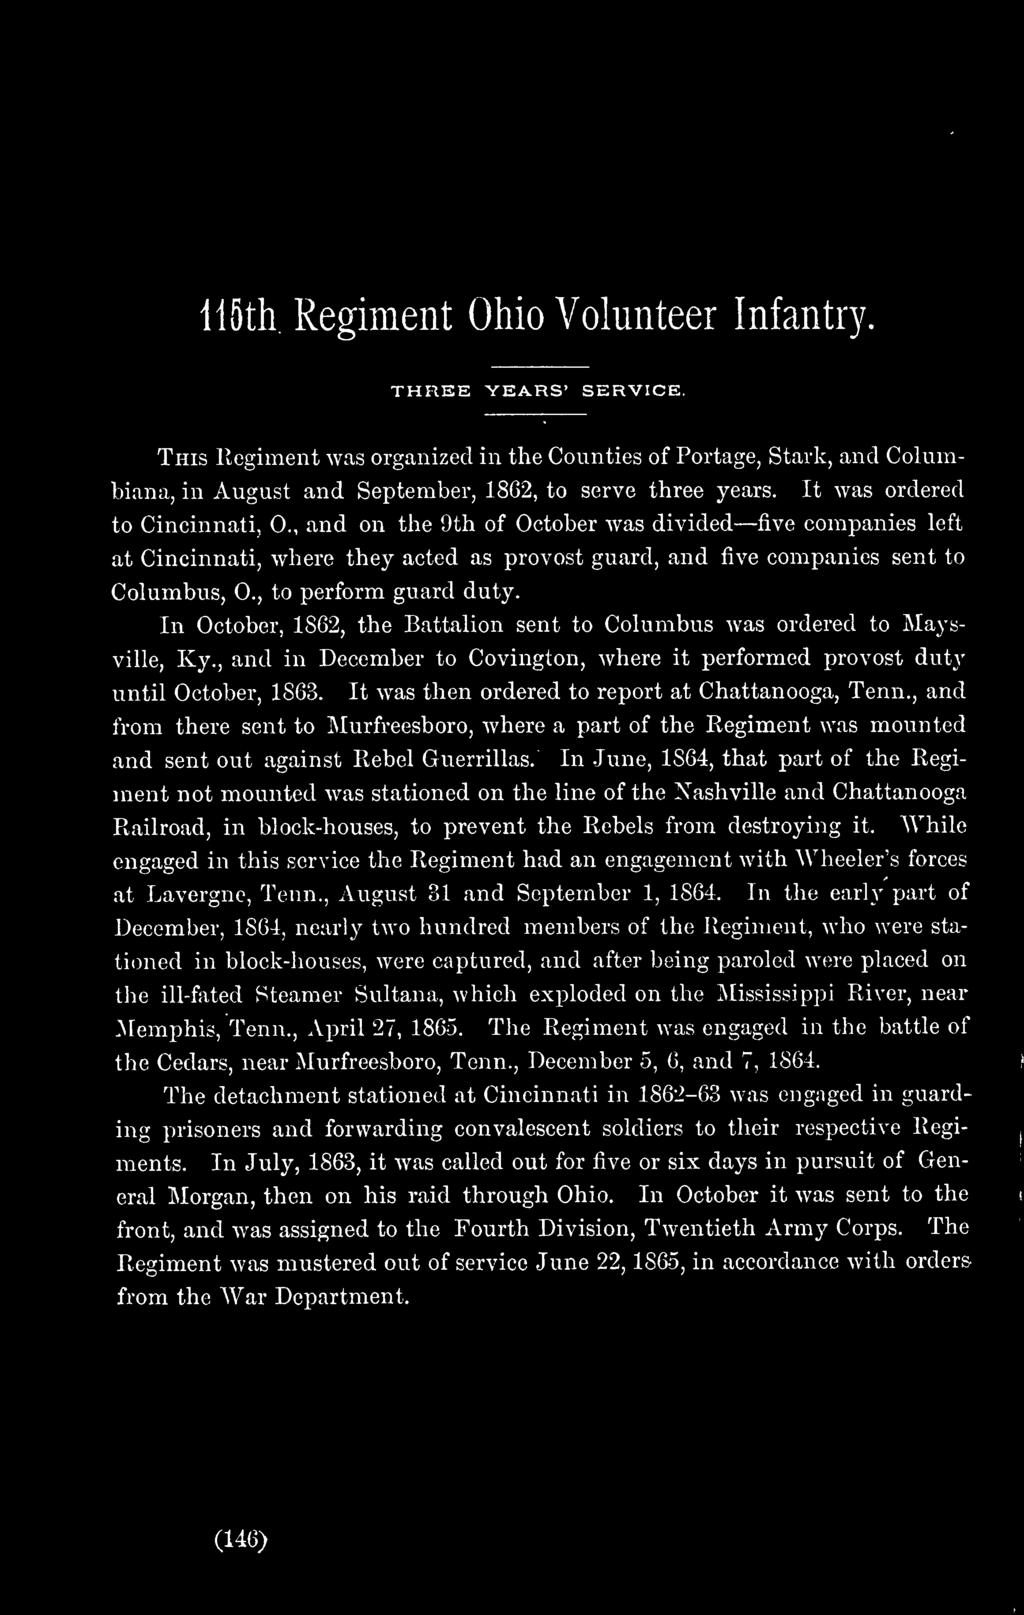 , to perform guard duty. In October, 1862, the Battalion sent to Columbus was ordered to Maysville, Ky., and in December to Covington, where it performed provost duty until October, 1868.